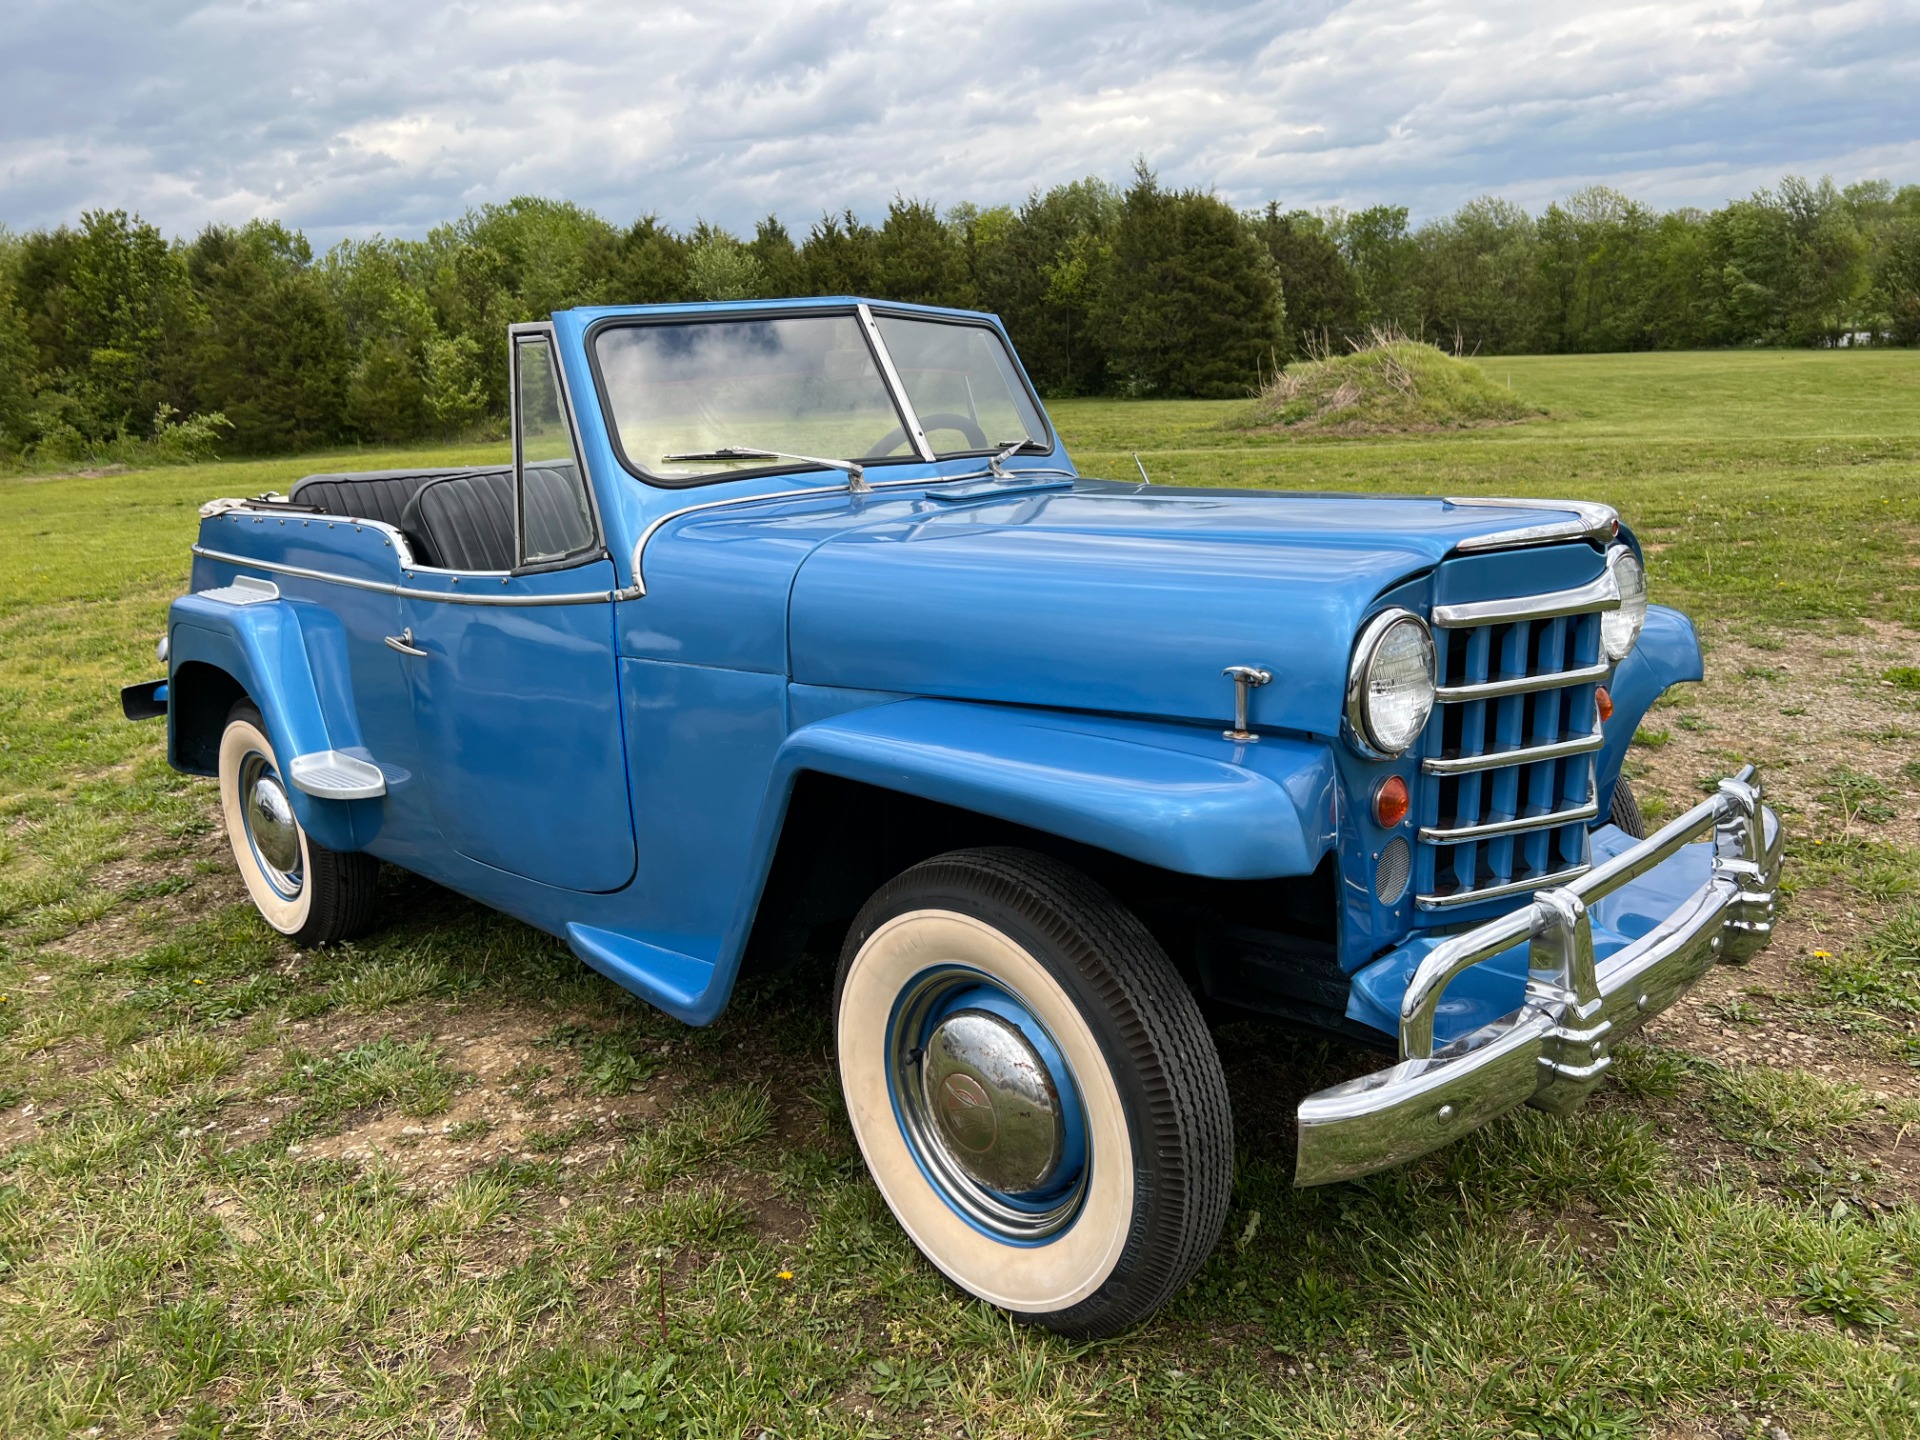 Used 1949 Willys Overland Jeepster